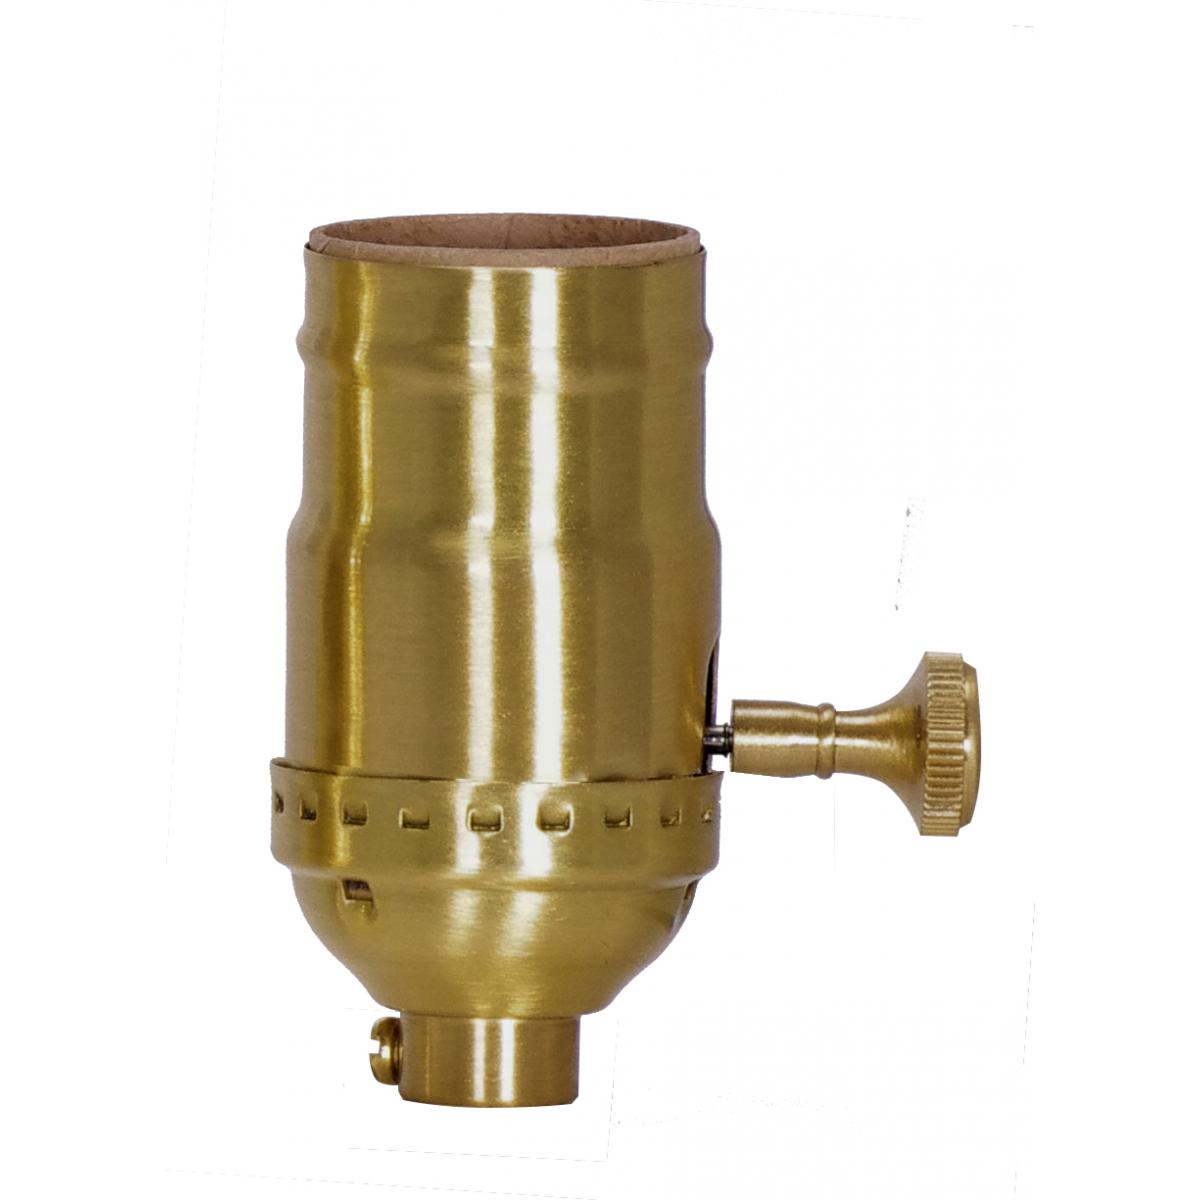 Satco 80-1772 On-Off Turn Knob Socket With Removable Knob 1/8 IPS 3 Piece Stamped Solid Brass Satin Brass Finish 250W 250V